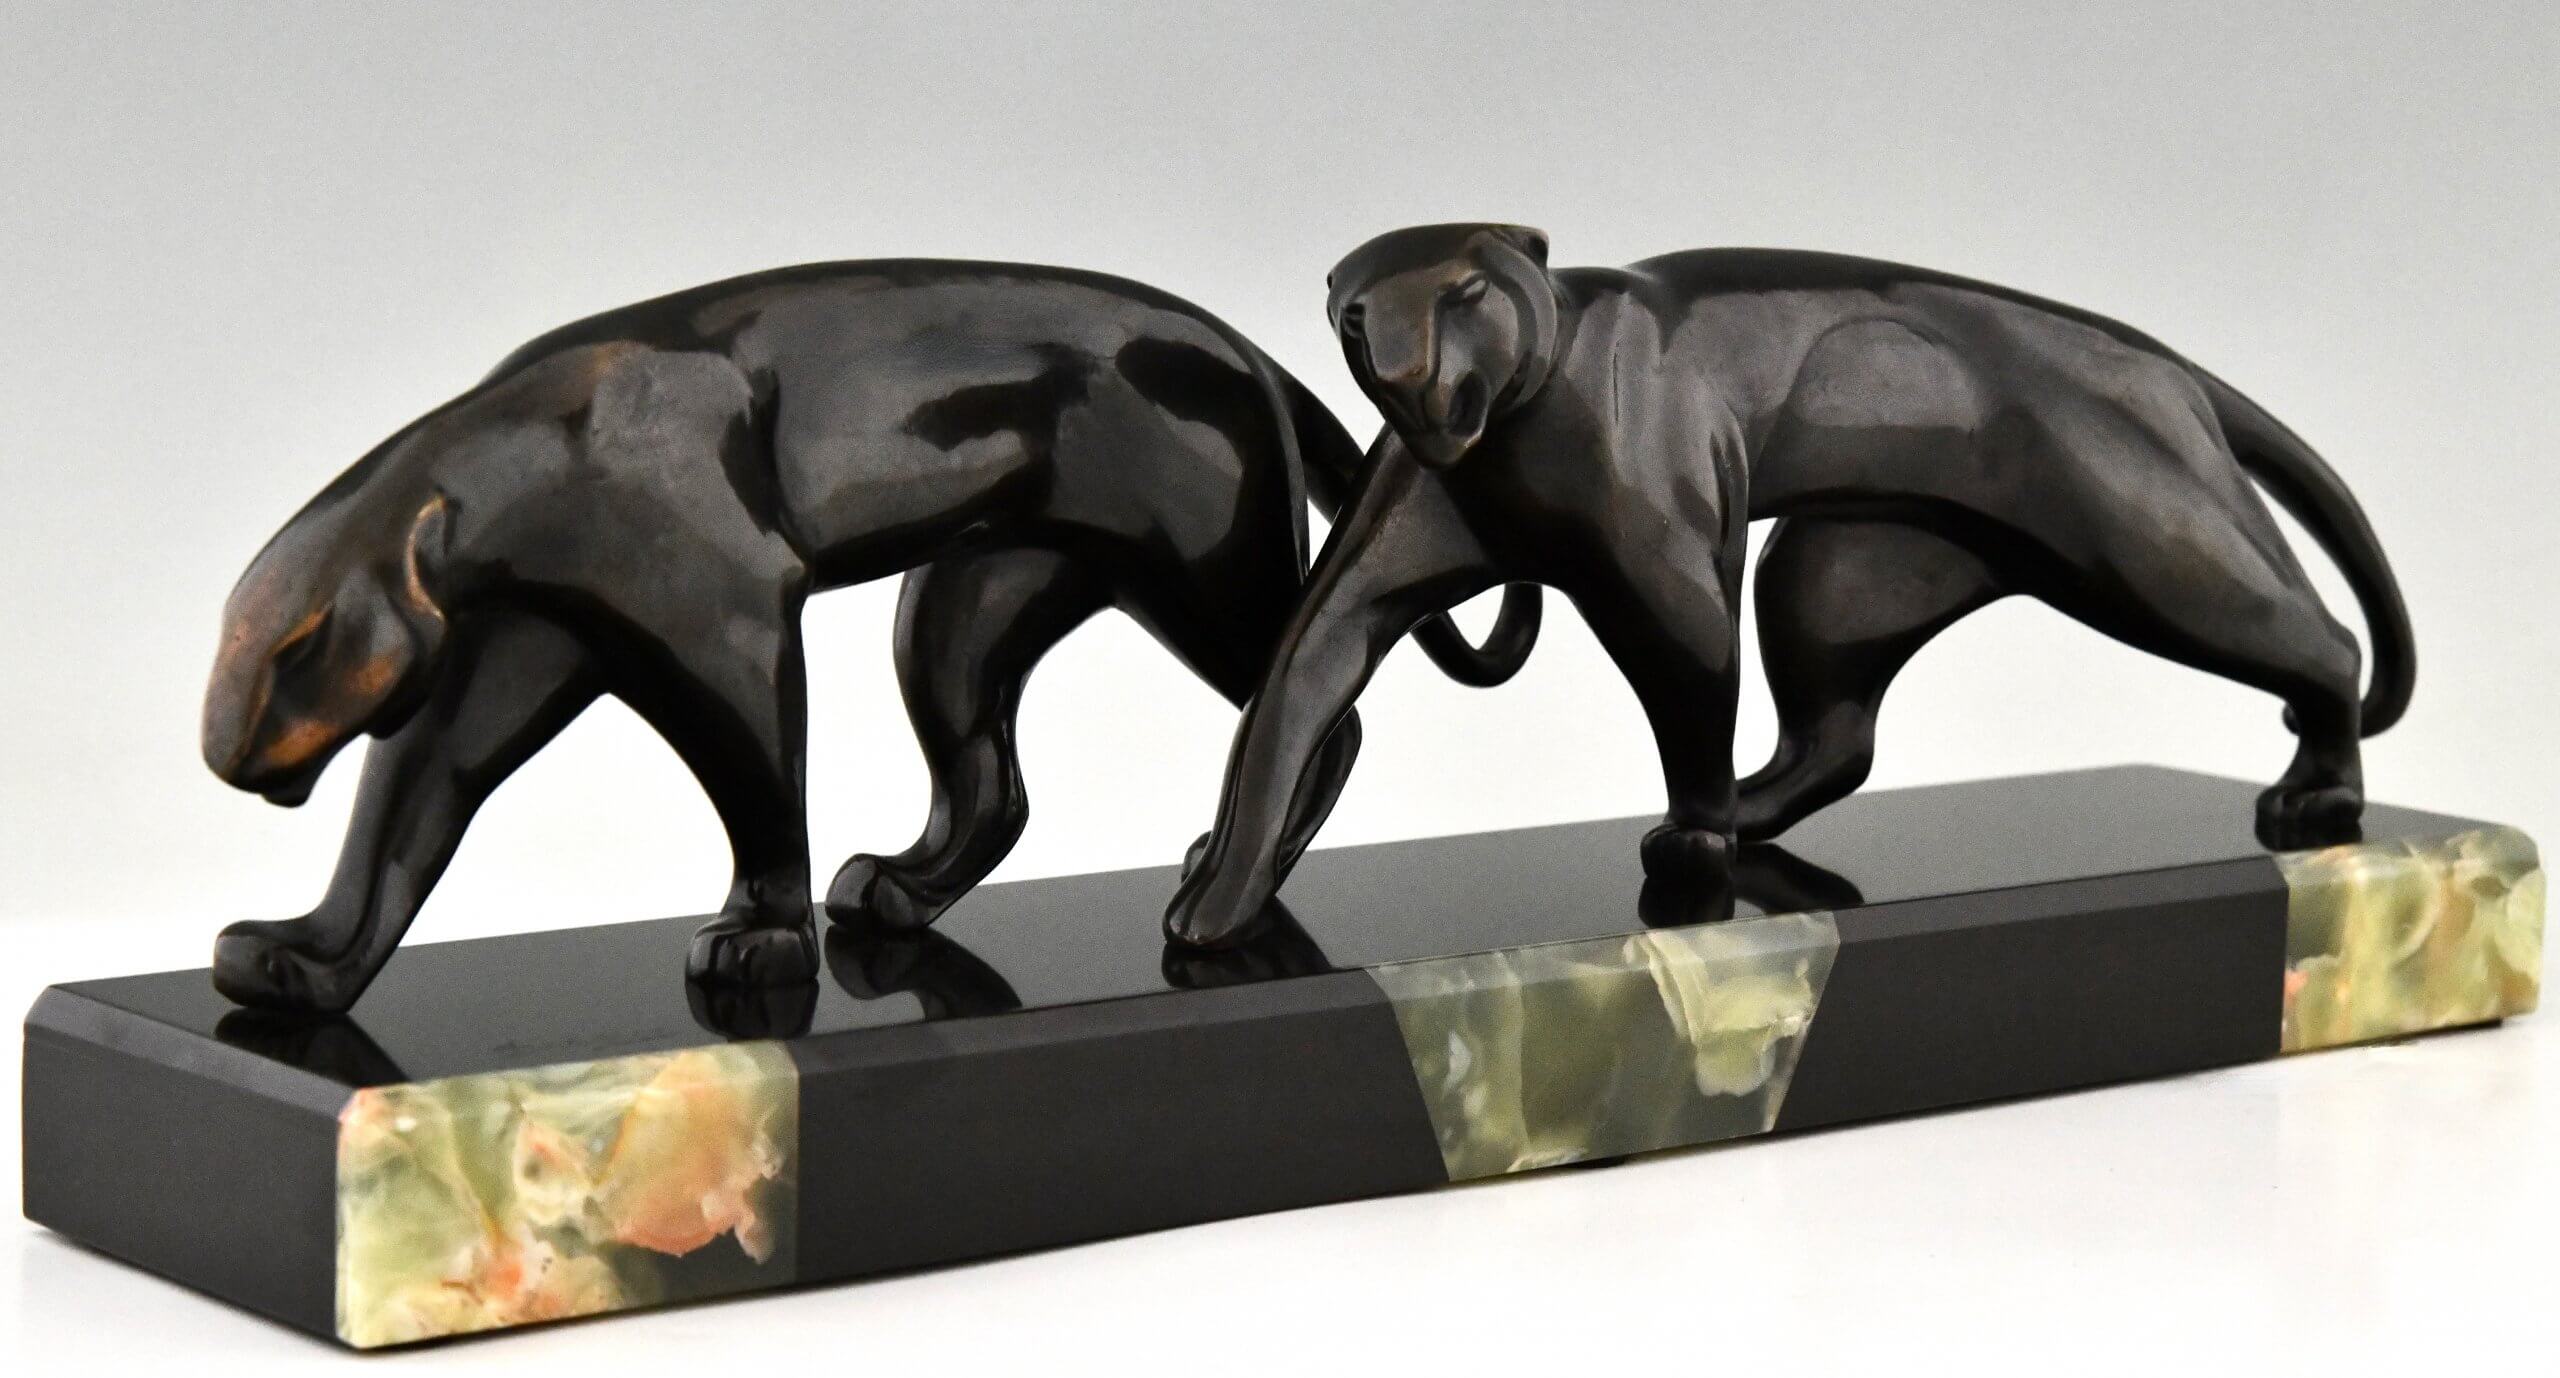 Art Deco bronze sculpture two panthers.